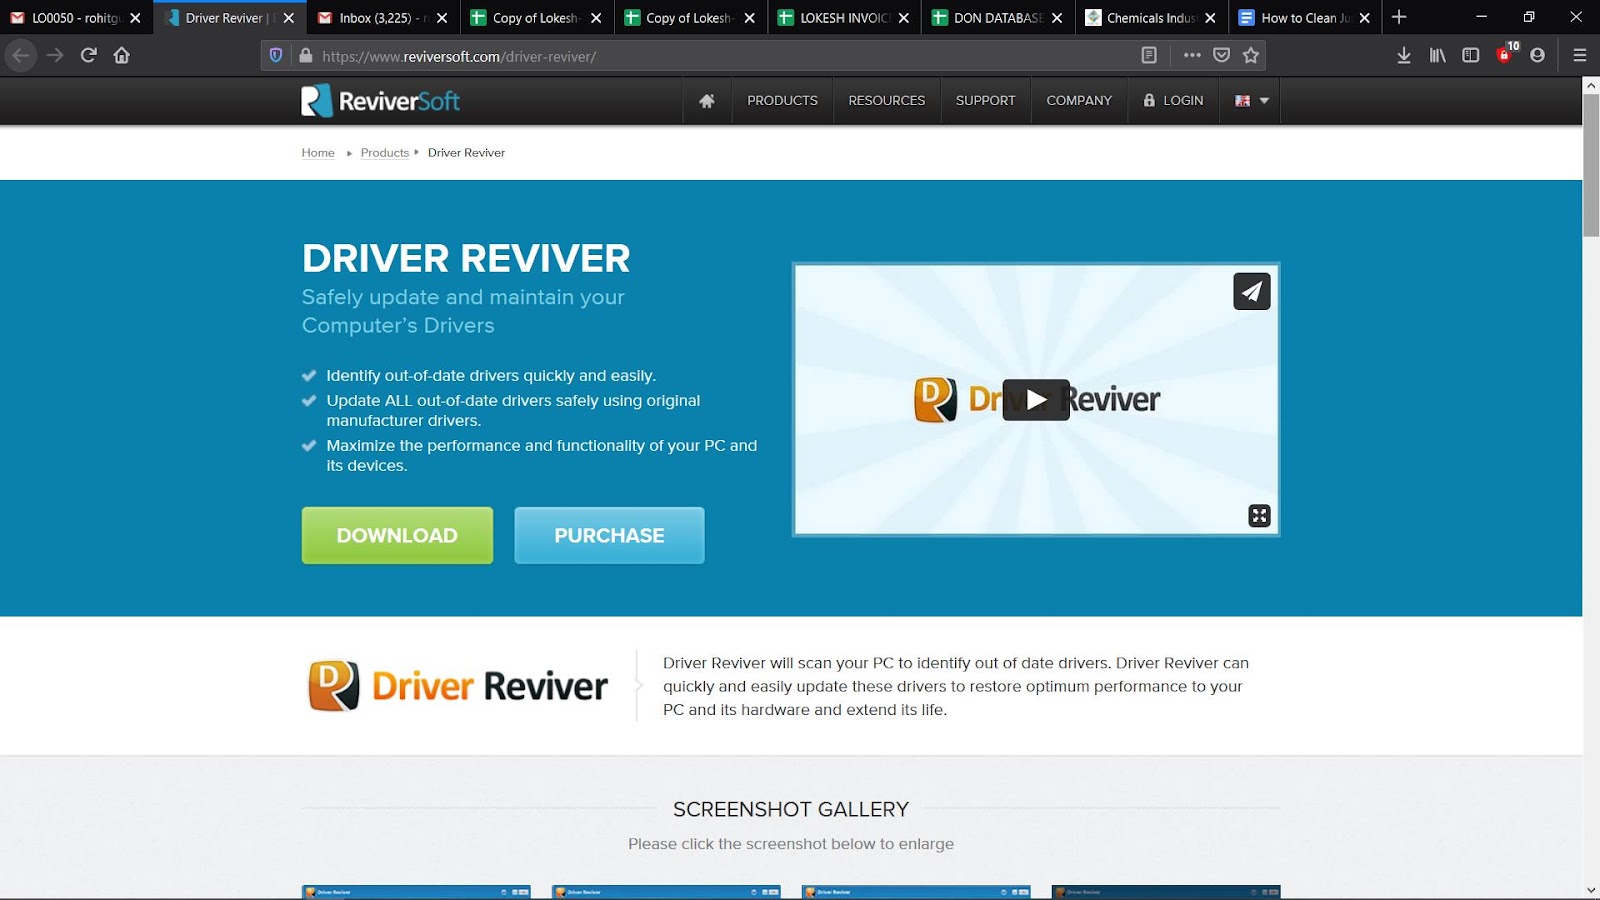 Driver Reviver Homepage